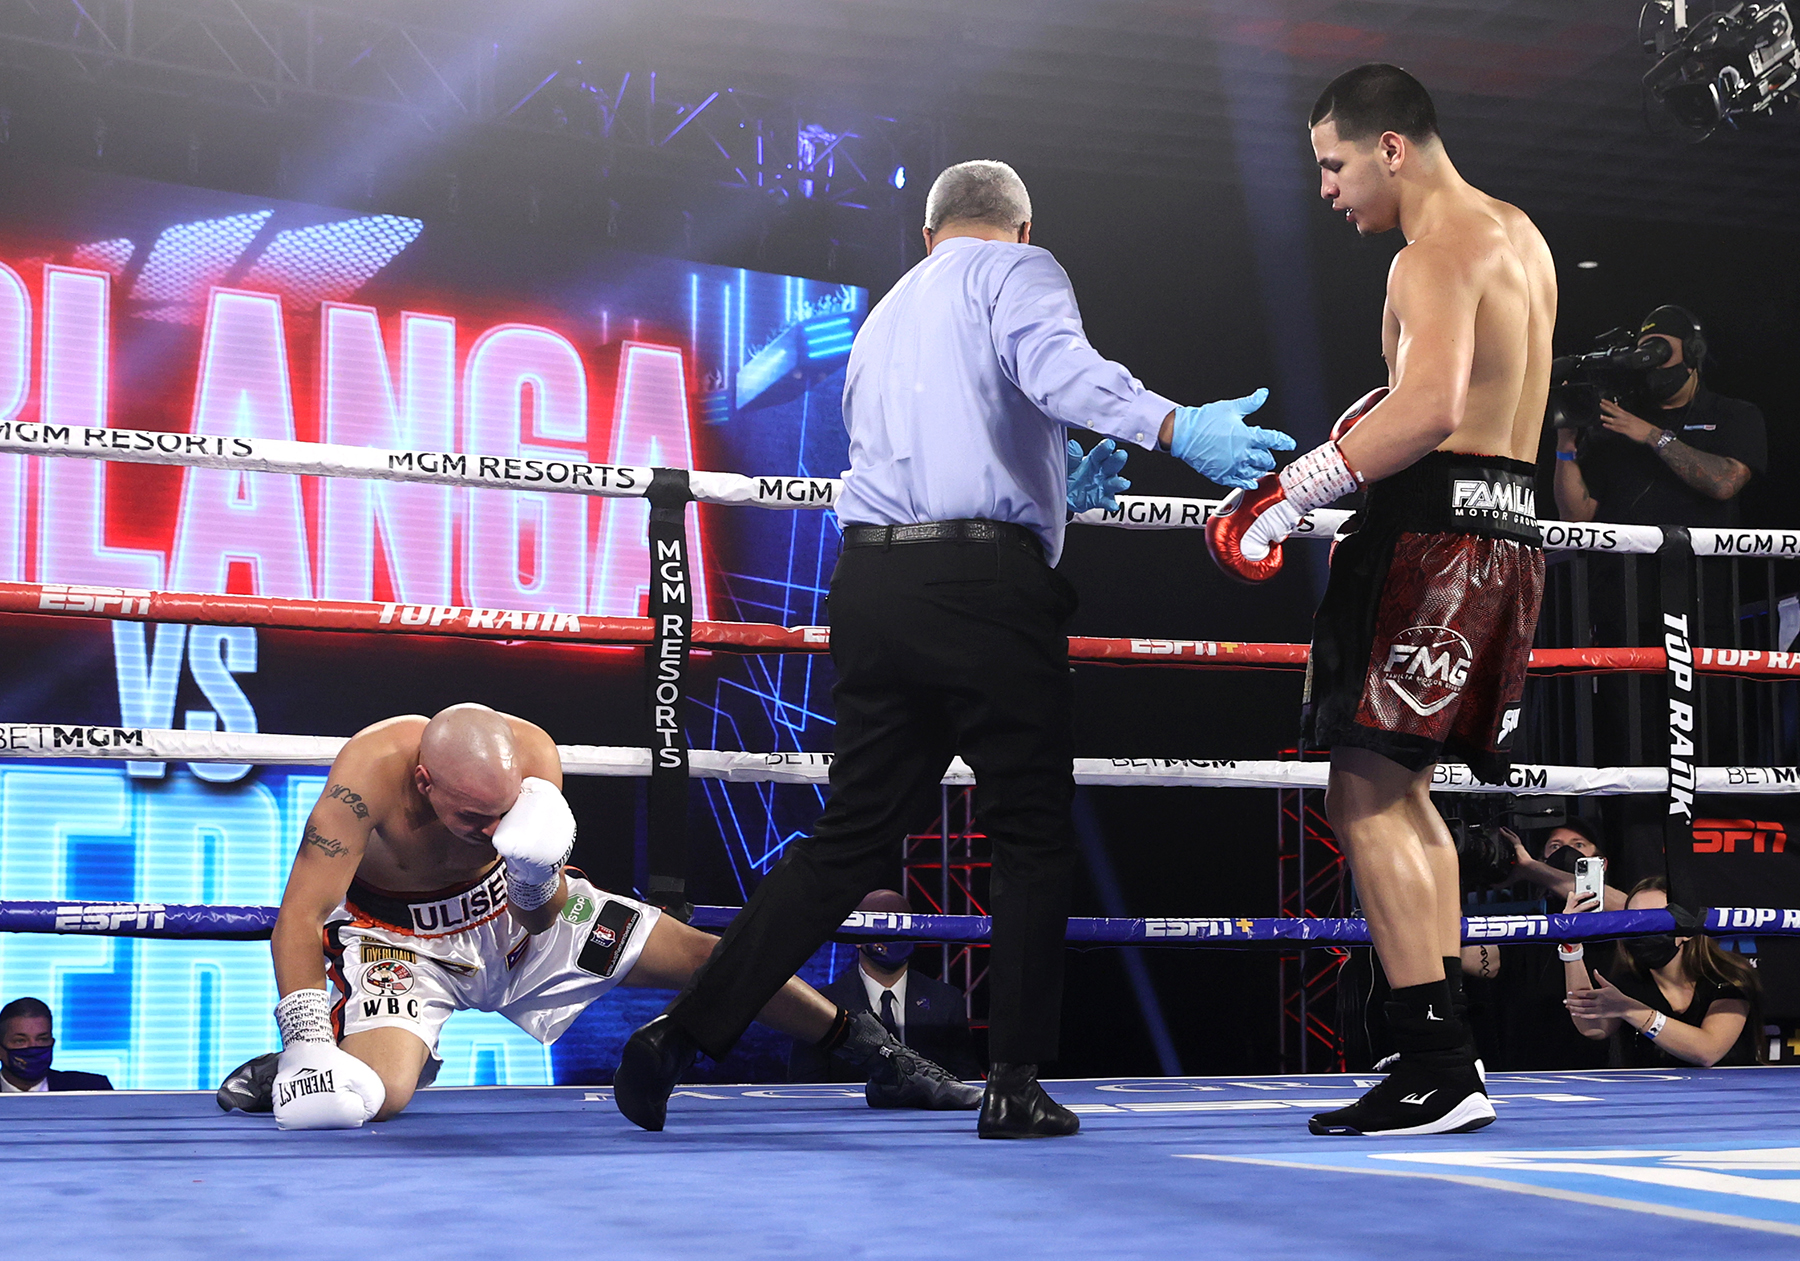 Edgar Berlanga (right) scored his 16th consecutive first-round KO vs. Ulises Sierra. Photo by Mikey Williams/Top Rank Inc via Getty Images